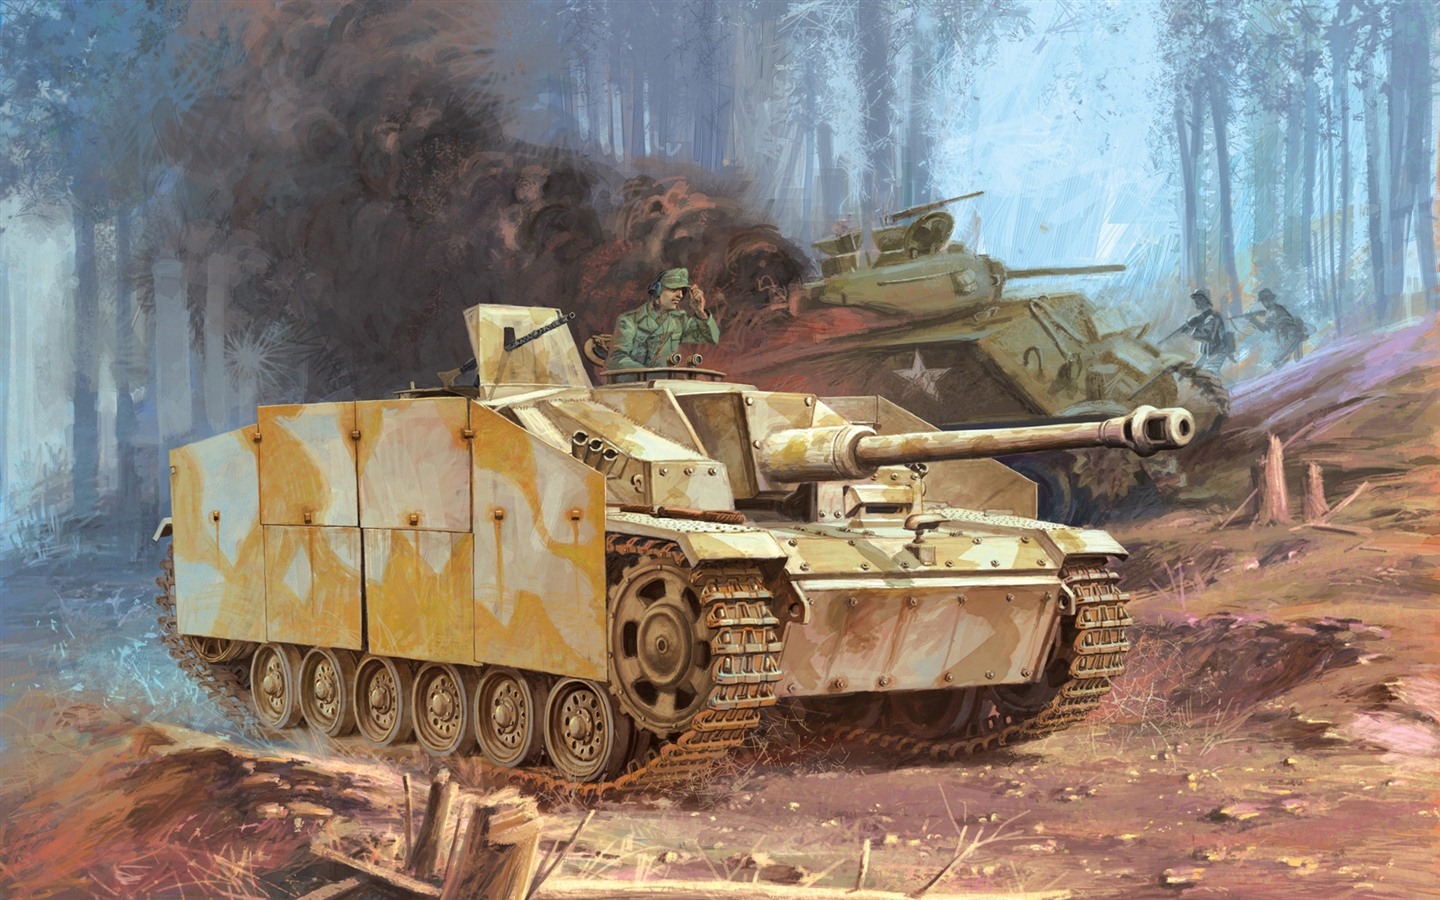 Military tanks, armored HD painting wallpapers #3 - 1440x900